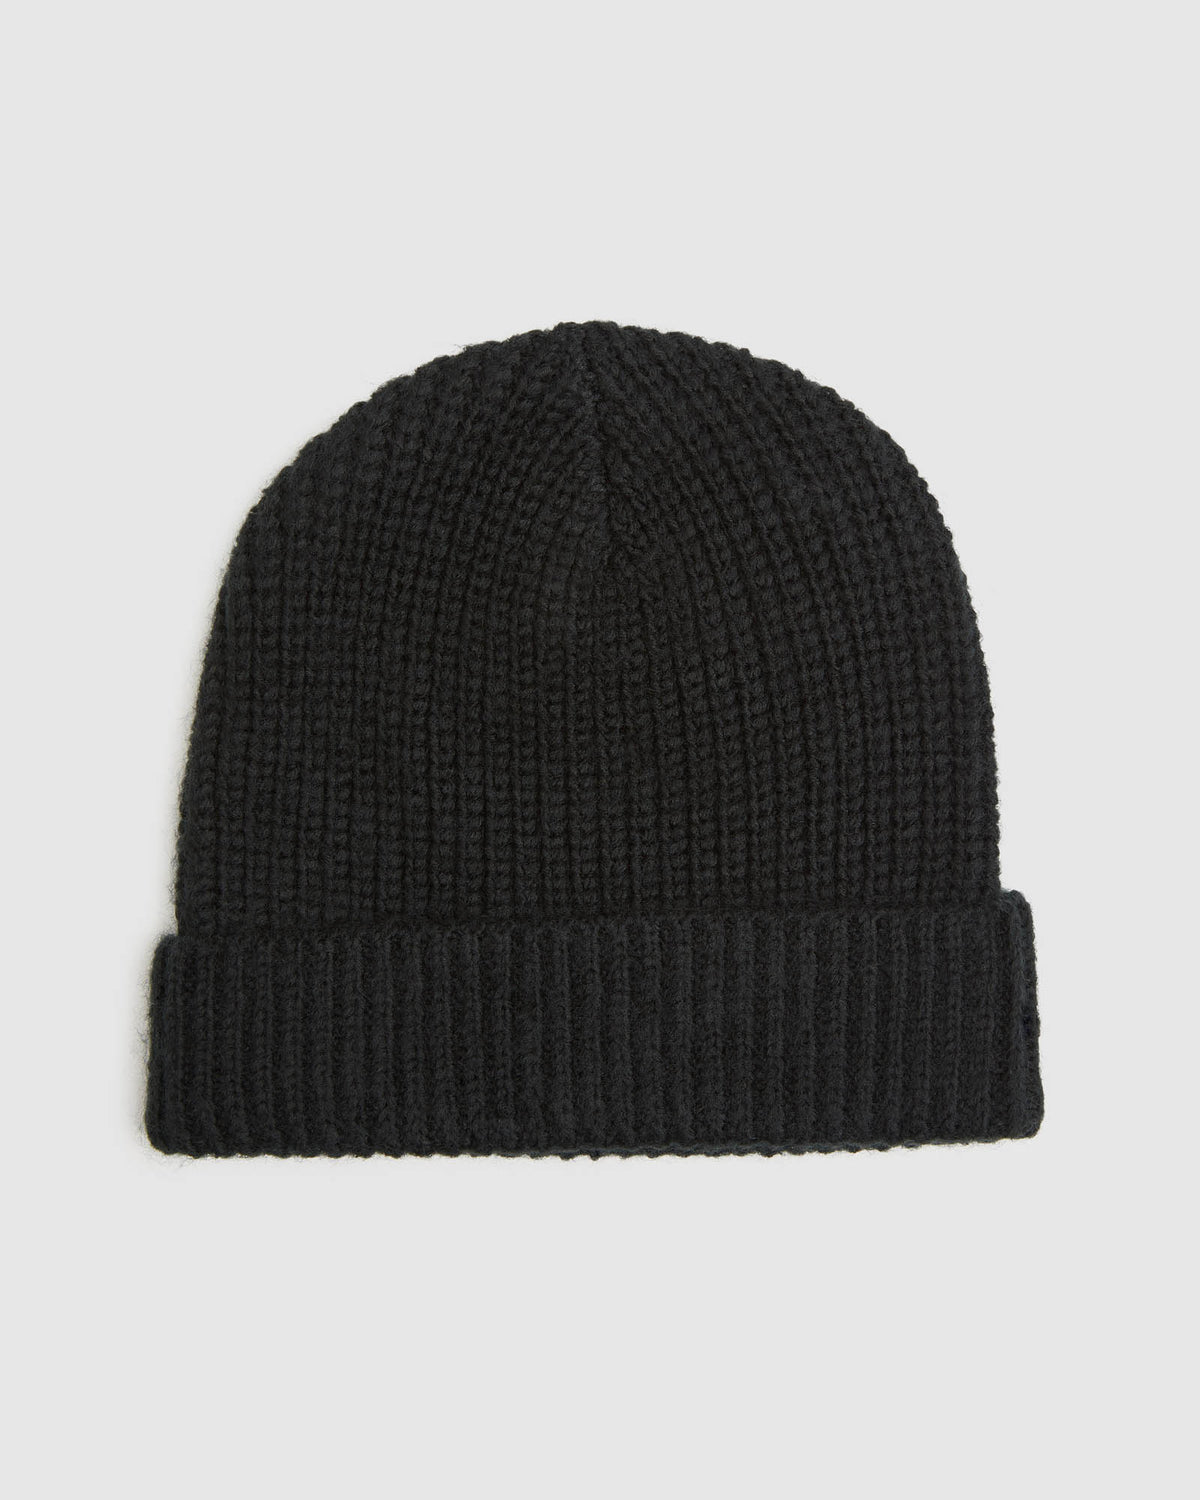 DYLAN KNIT BEANIE MENS ACCESSORIES